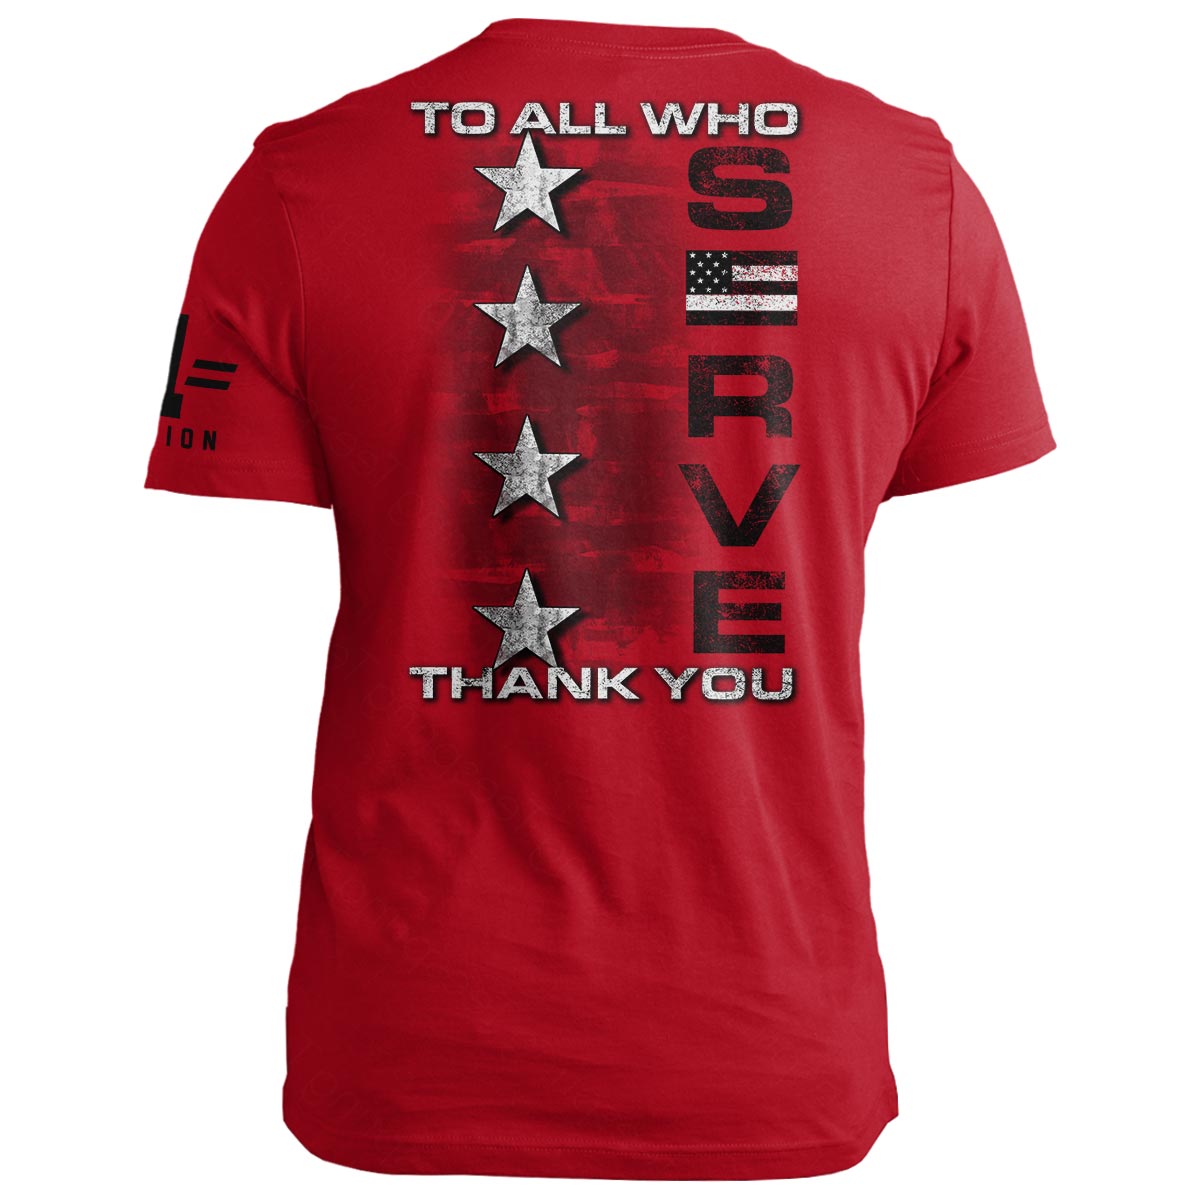 Red Friday: THANK YOU